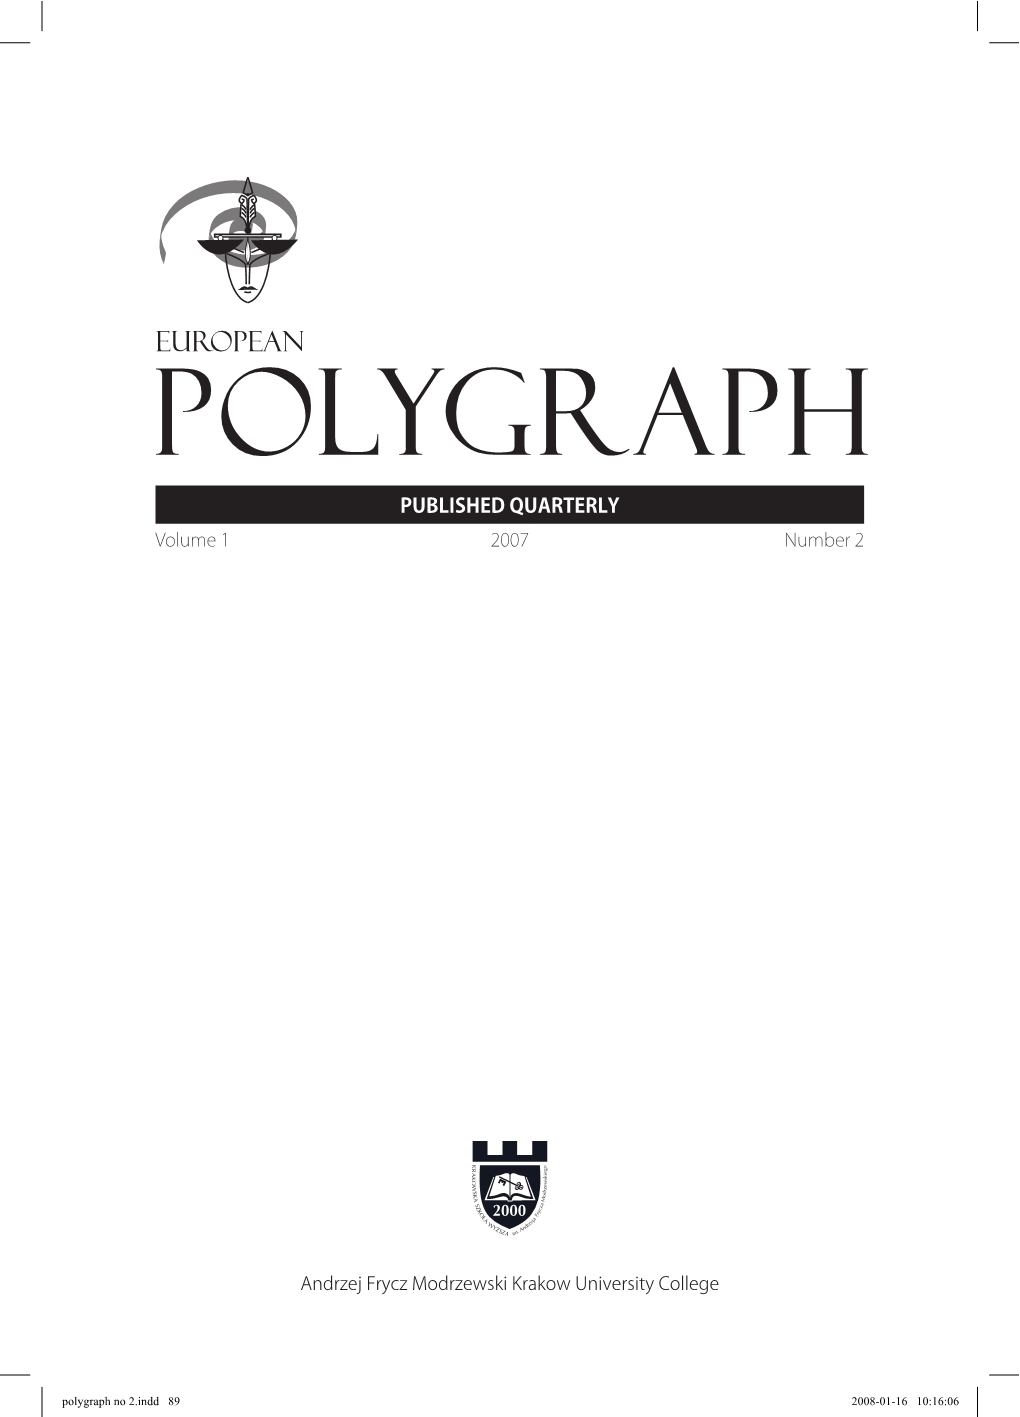 Jaworski, Ryszard (2006) Situational sequencing tests in polygraph examination(s)